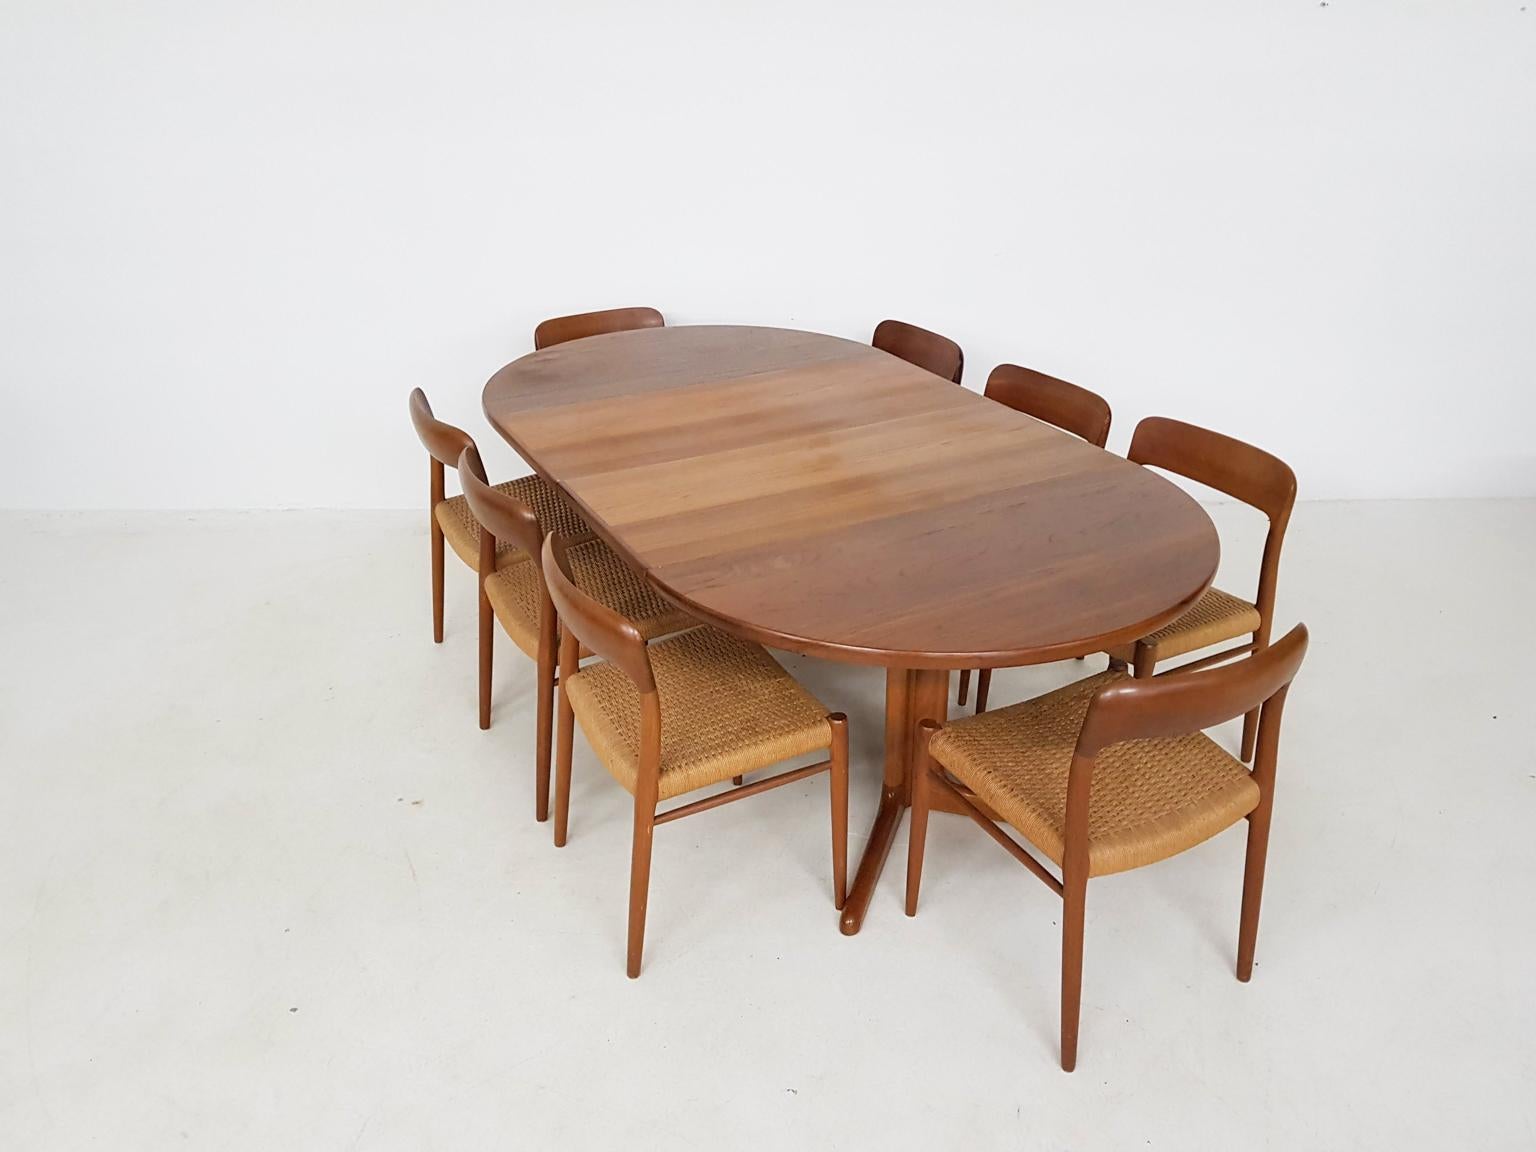 A set of 8 dining chairs designed by Niels Otto Møller. This specific model is number 75 and was made in Denmark in the 1950s. An excellent piece of Classic Danish modern furniture design. And a teak extendable dining table by Skovby Denmark.

The